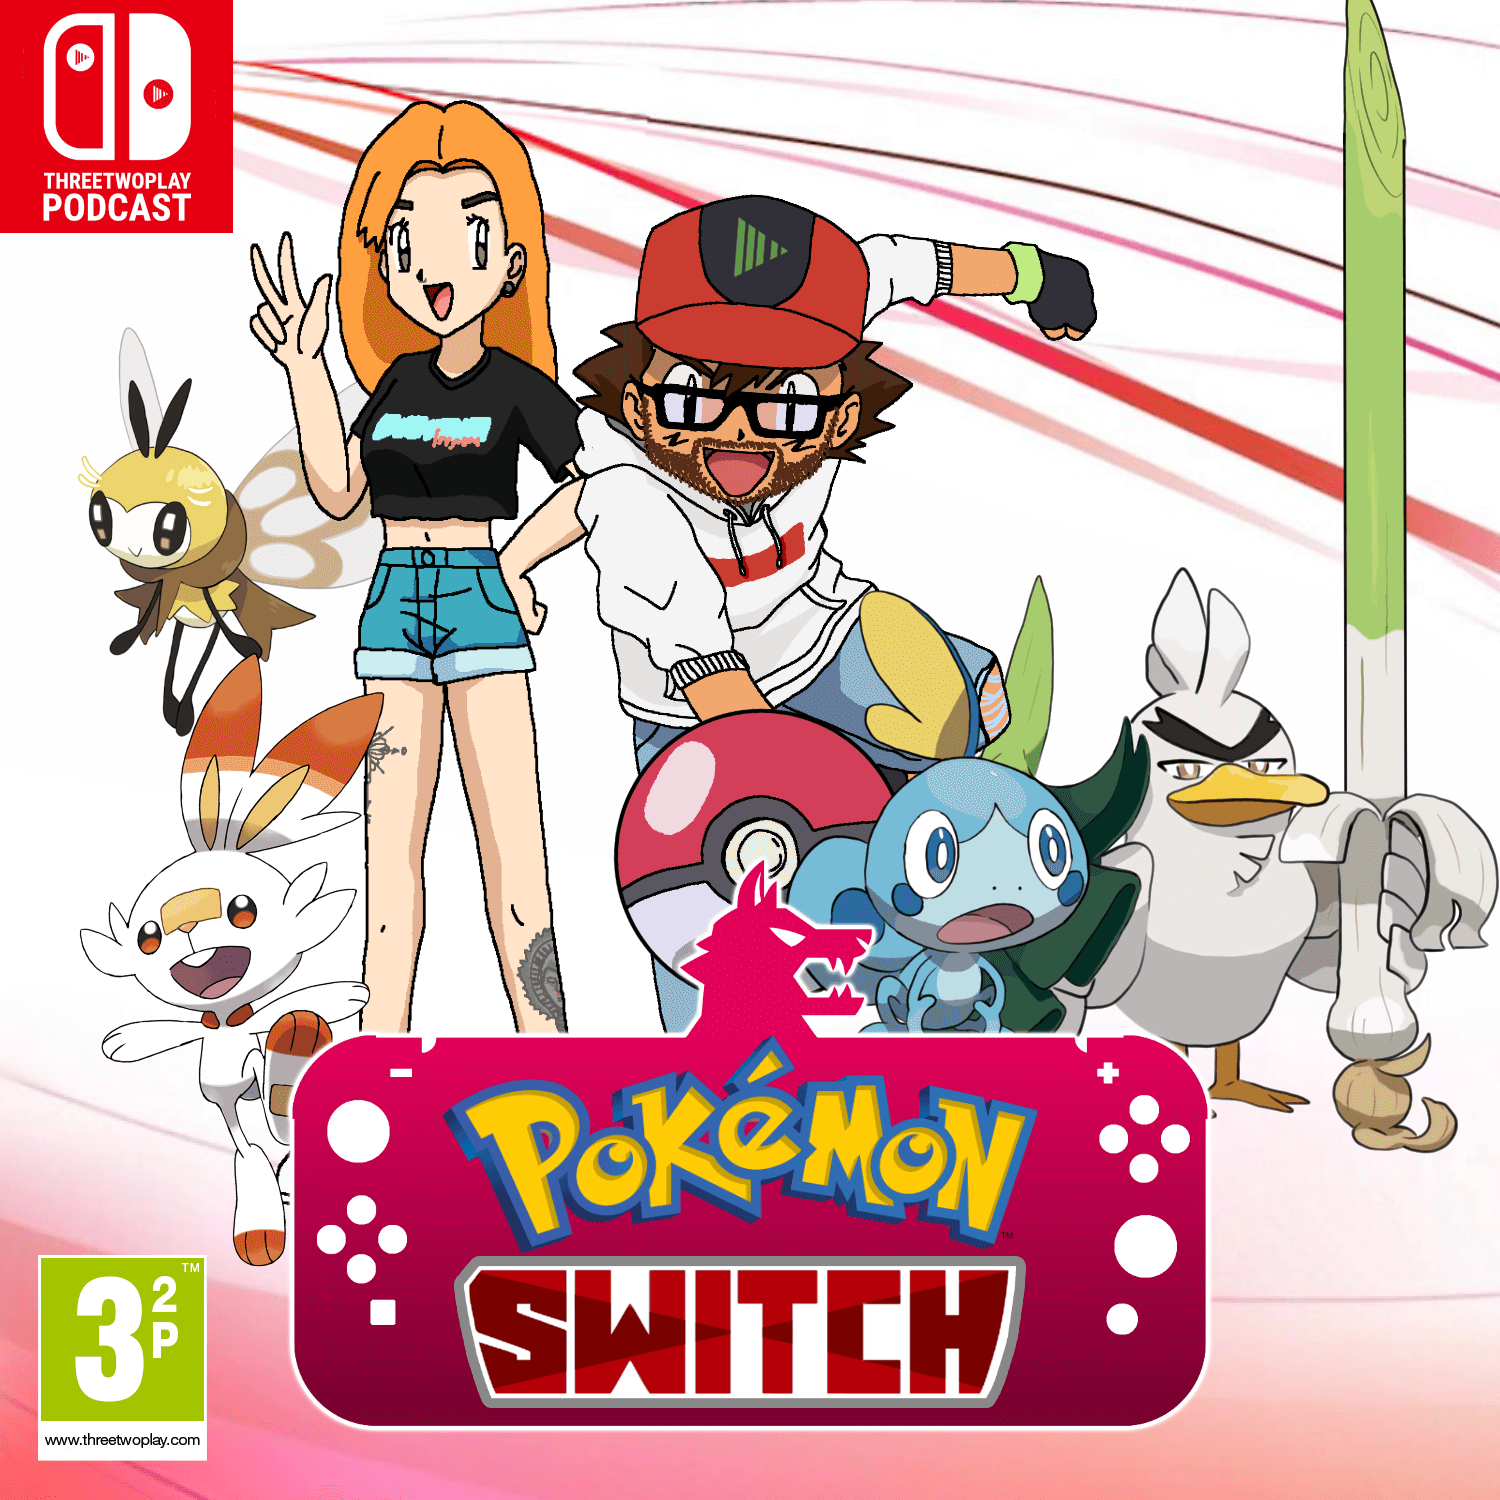 Pokemon_Cover8bkw2t.png